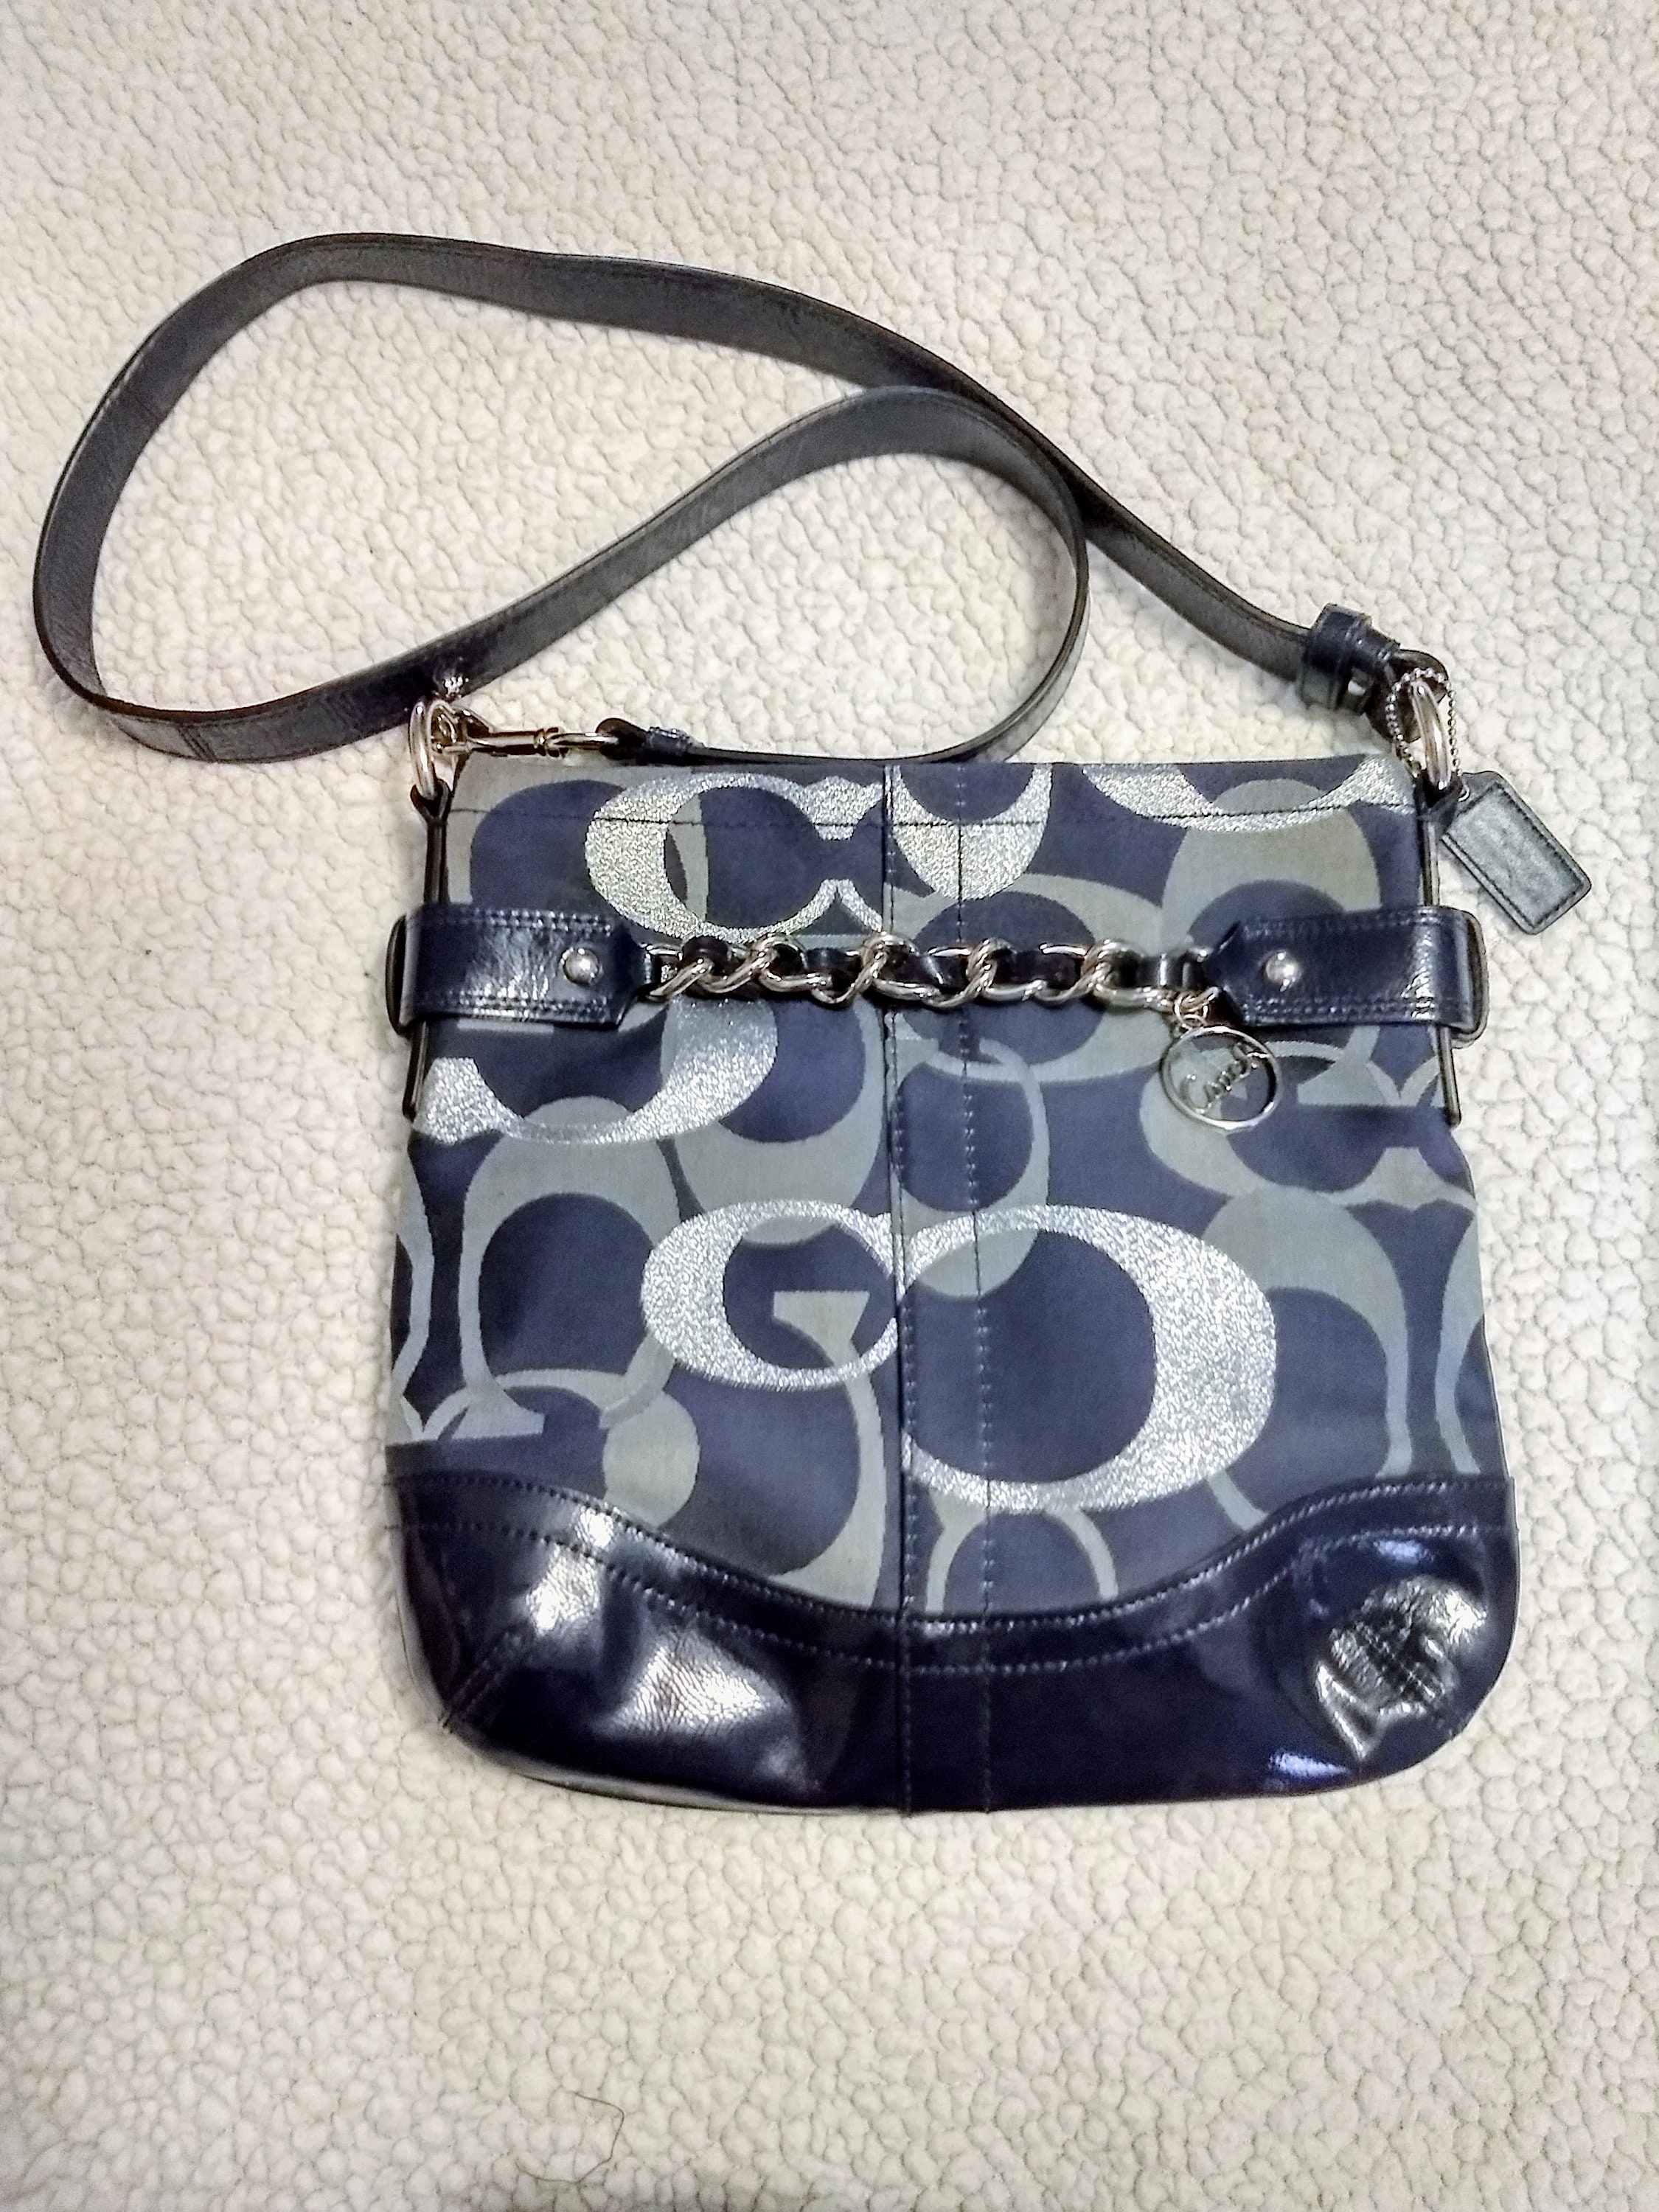 Buy [Used] COACH Field Tote 40 2way Shoulder Bag with Horse and Carriage  Leather Suede Navy C6612 from Japan - Buy authentic Plus exclusive items  from Japan | ZenPlus